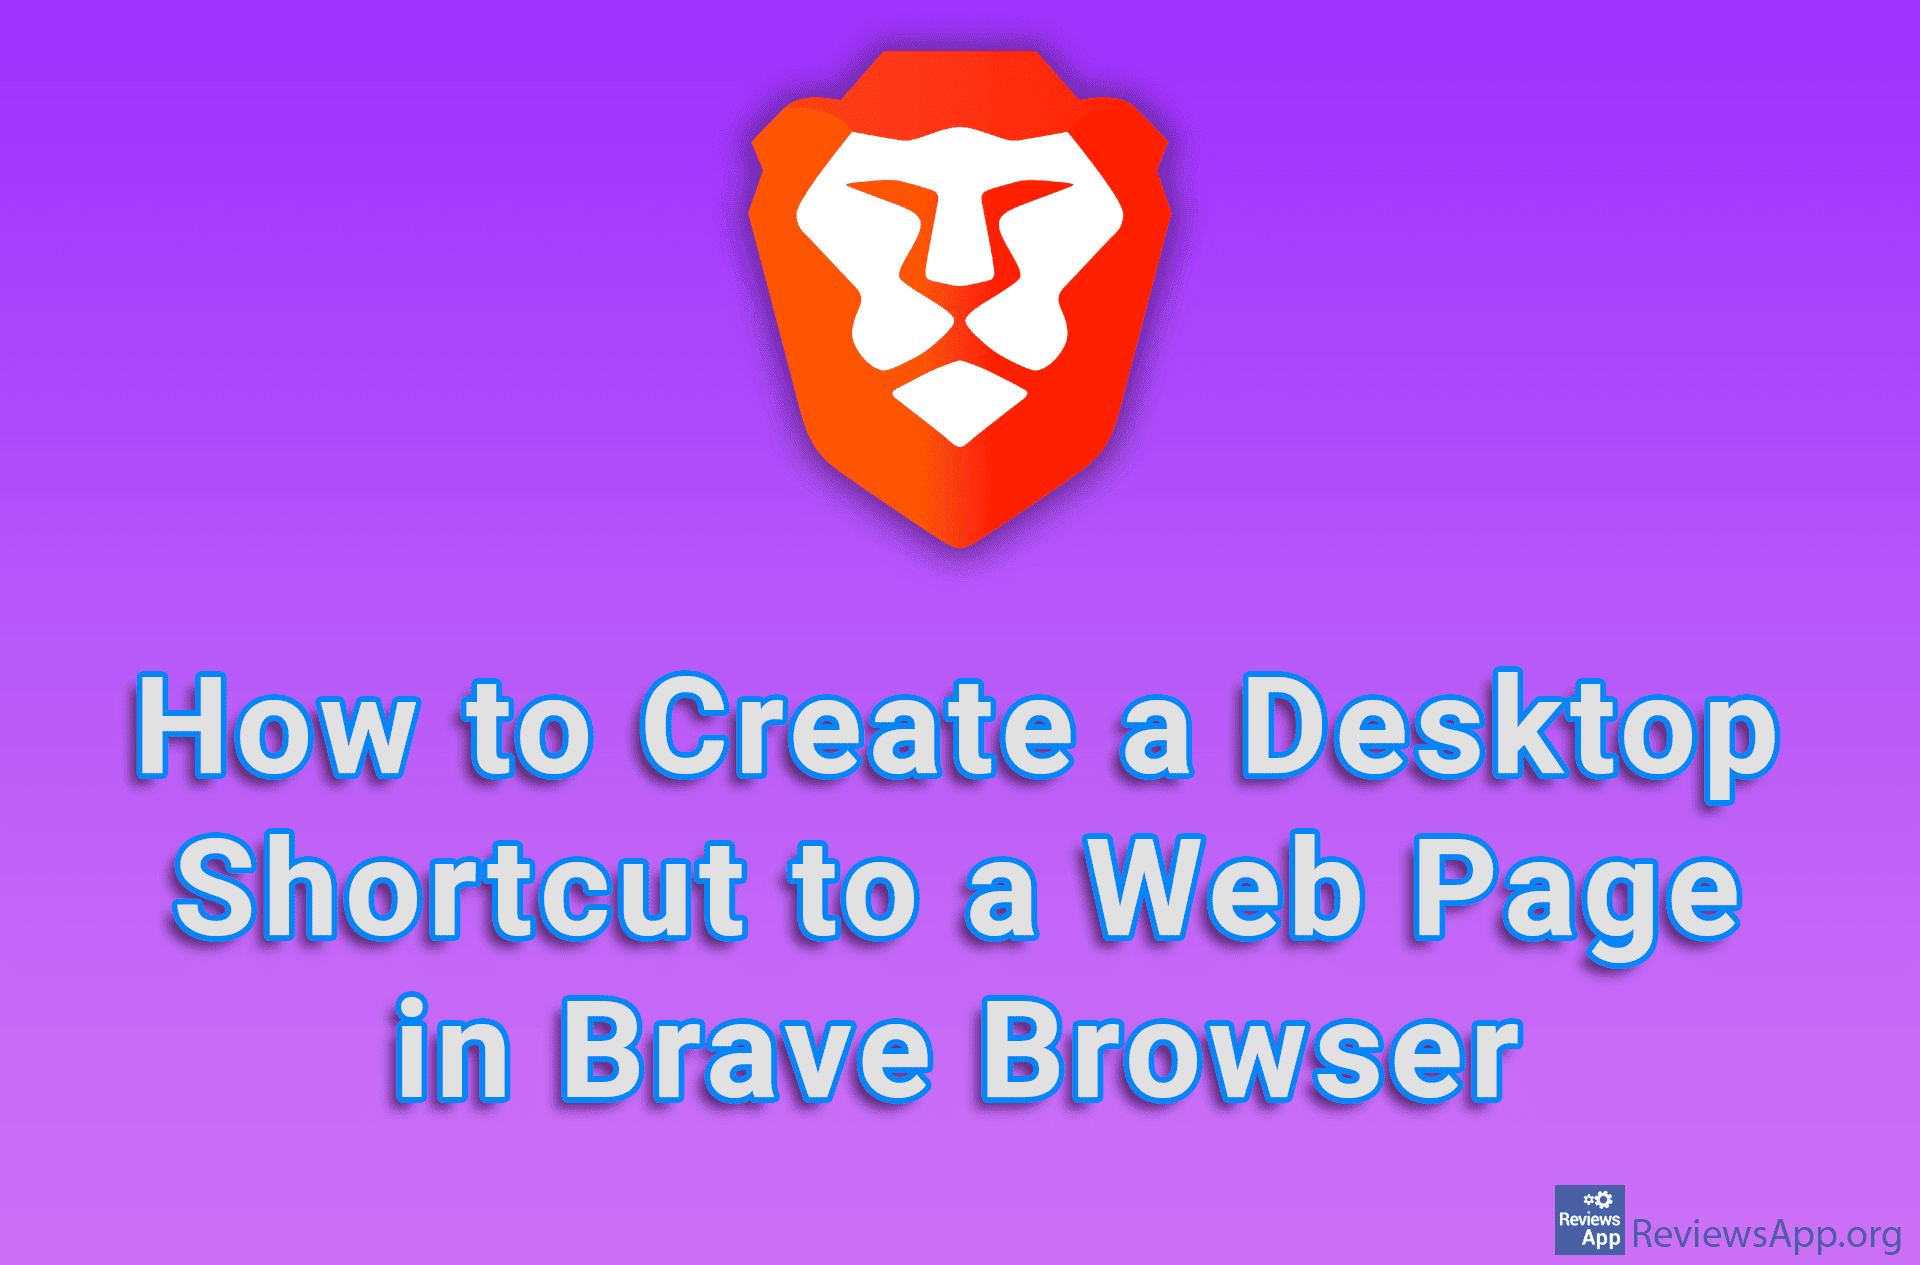 How to Create a Desktop Shortcut to a Web Page in Brave Browser